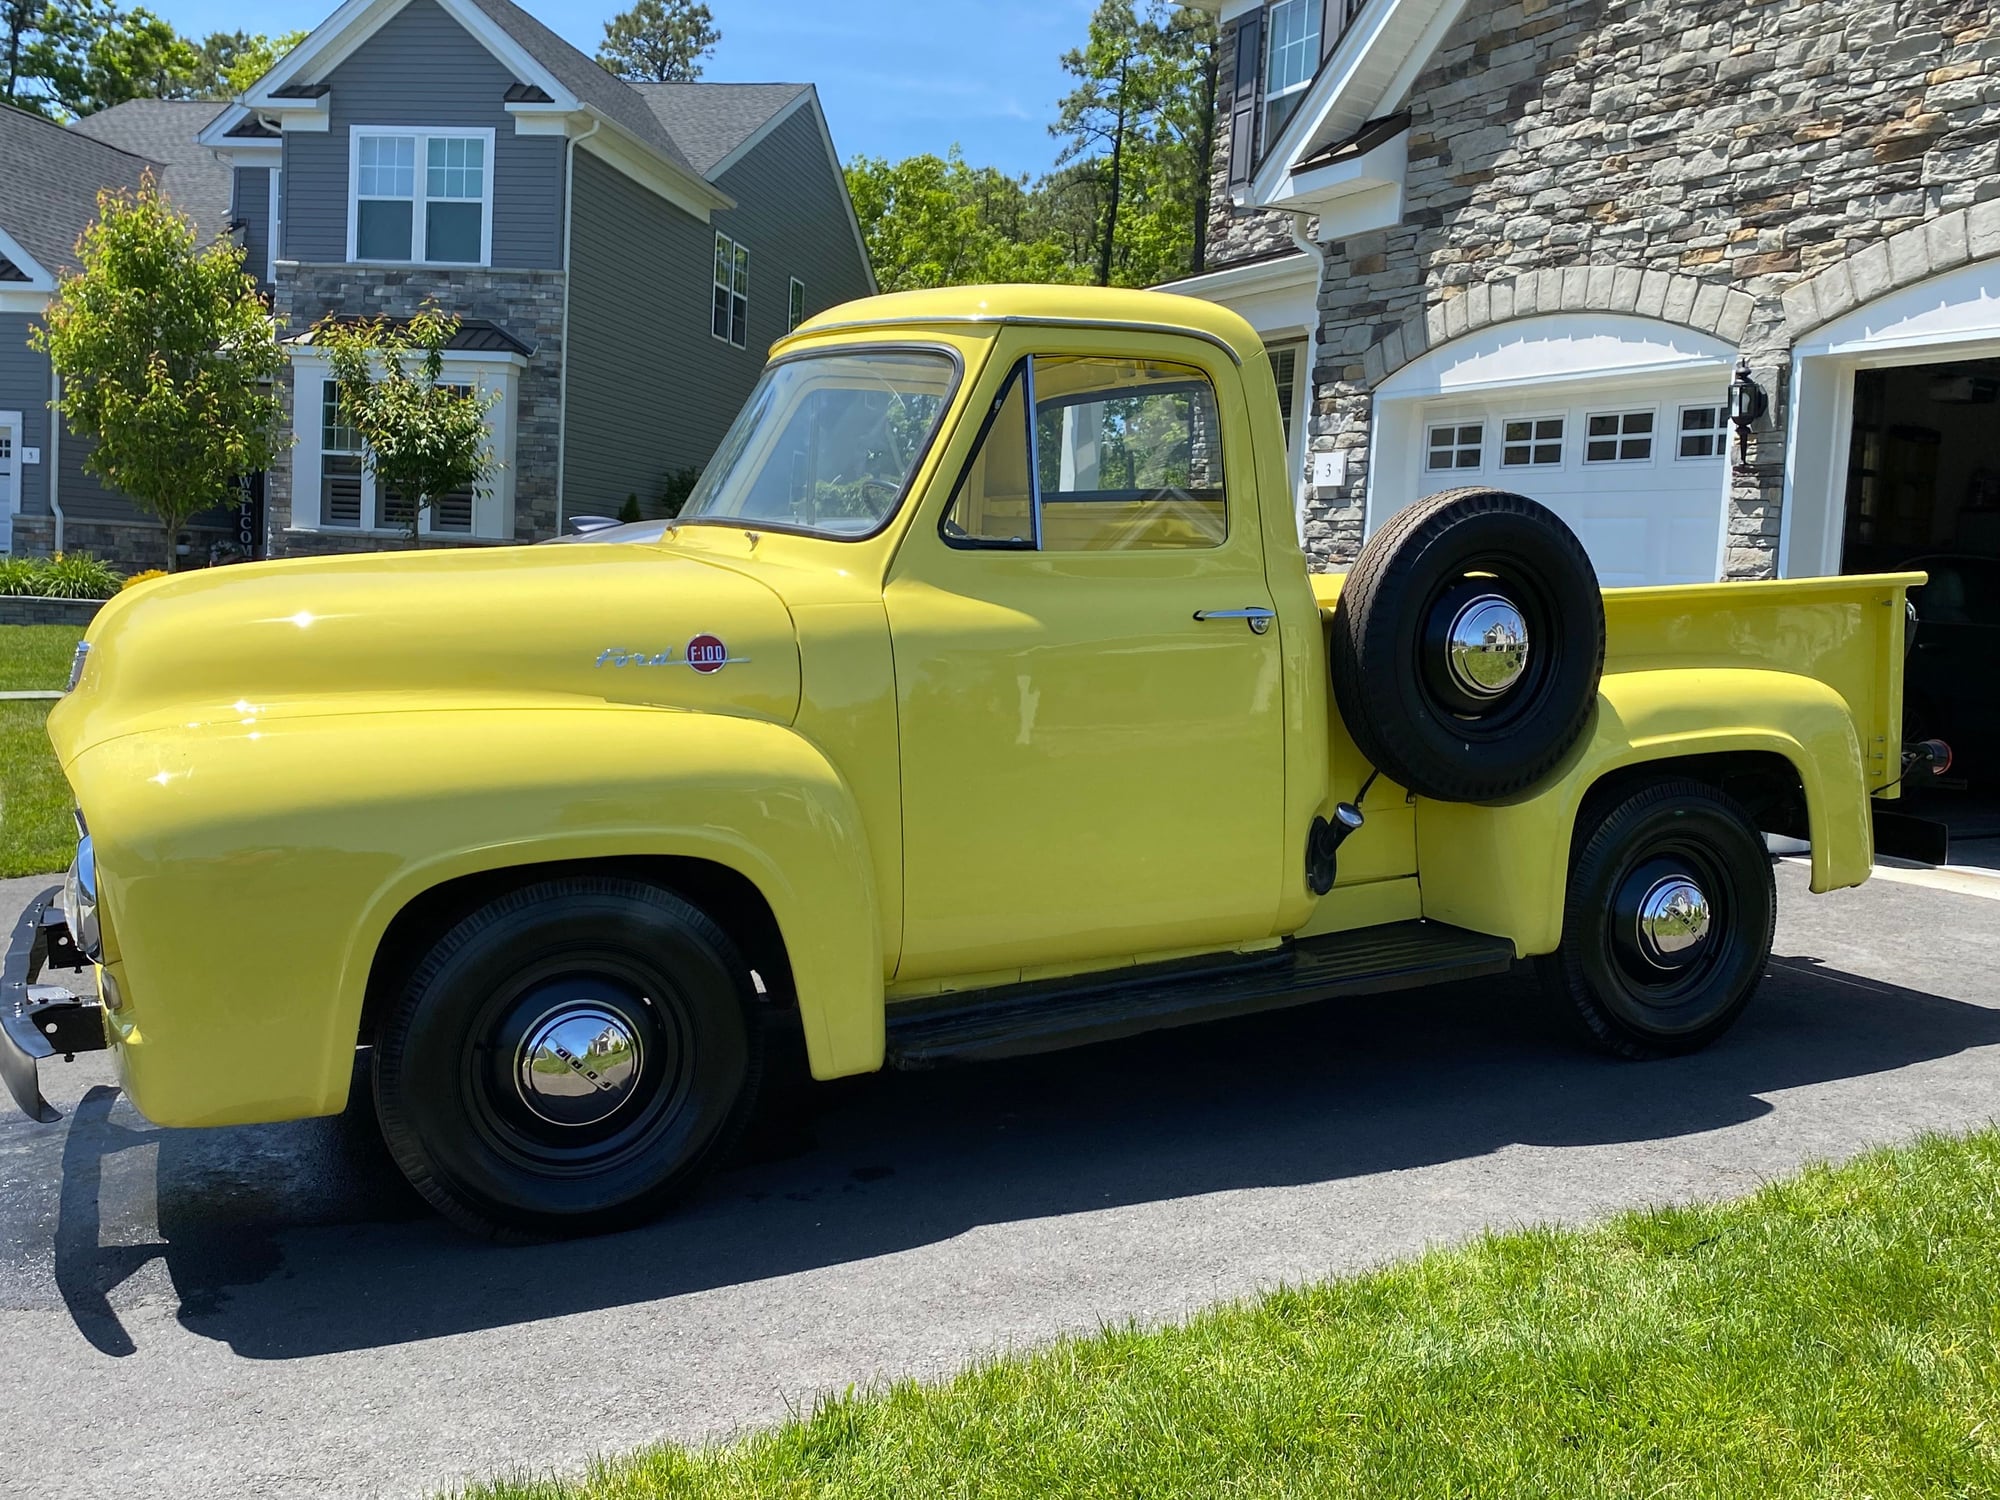 1955 Ford F-100 - 1955 F100 - Used - VIN F10CV5U10100 - 8 cyl - 2WD - Manual - Truck - Yellow - Forked River, NJ 08731, United States